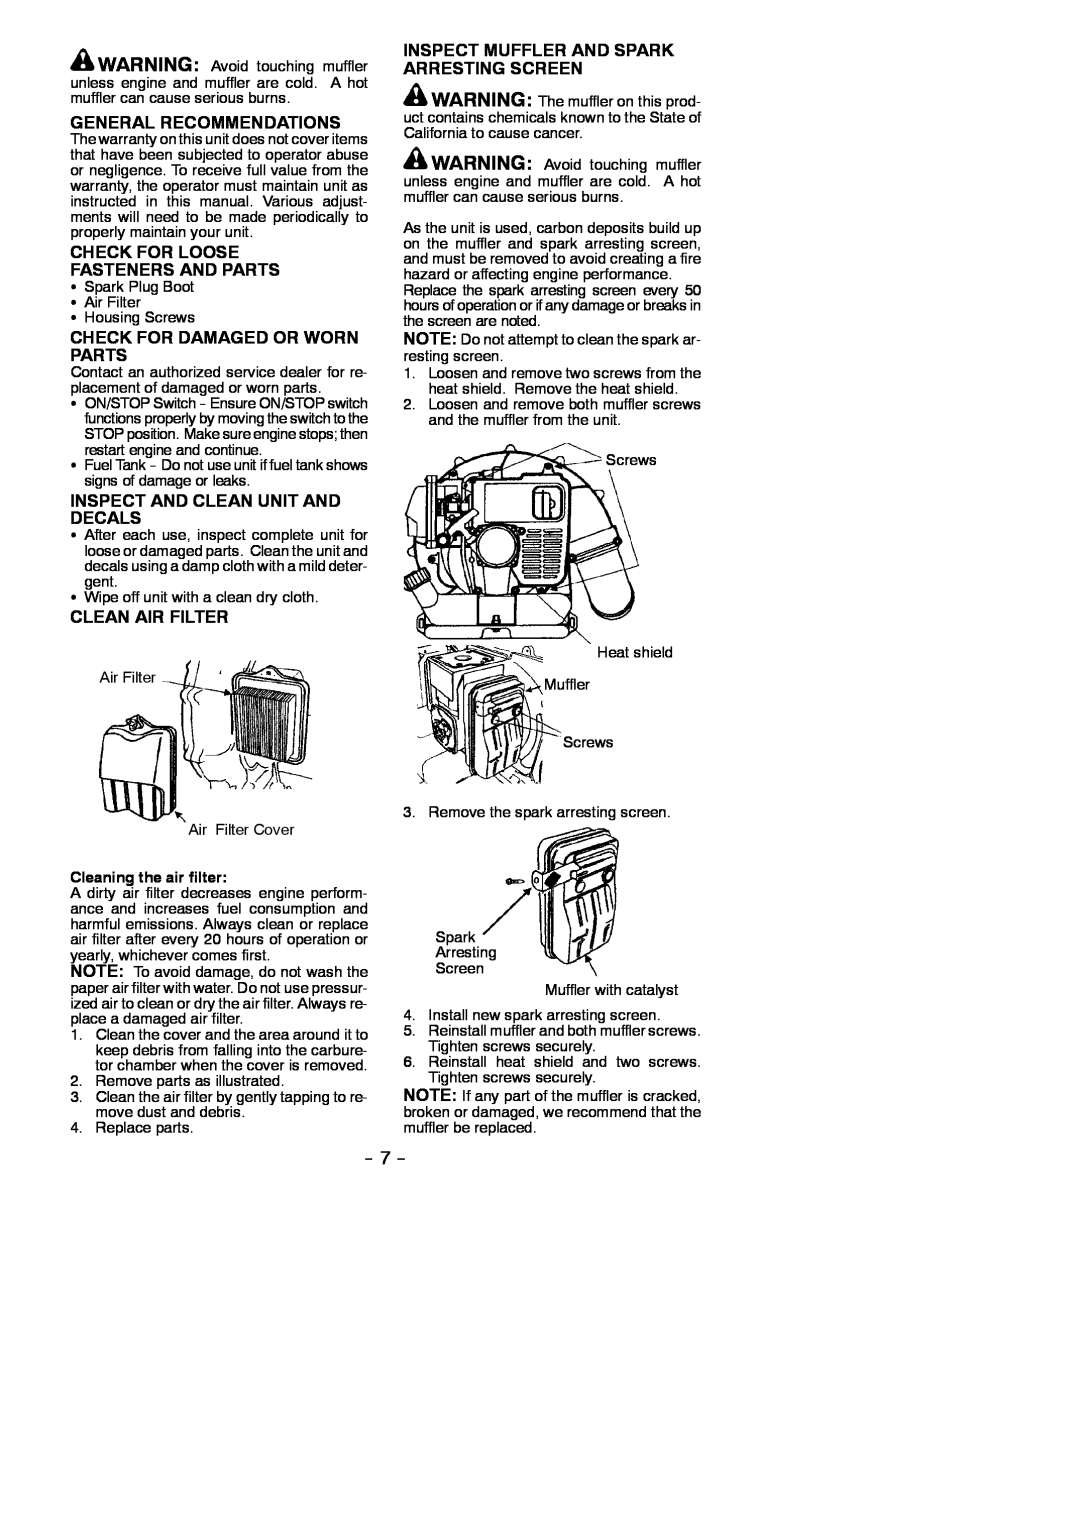 Poulan BP406 General Recommendations, Check For Loose Fasteners And Parts, Check For Damaged Or Worn Parts 